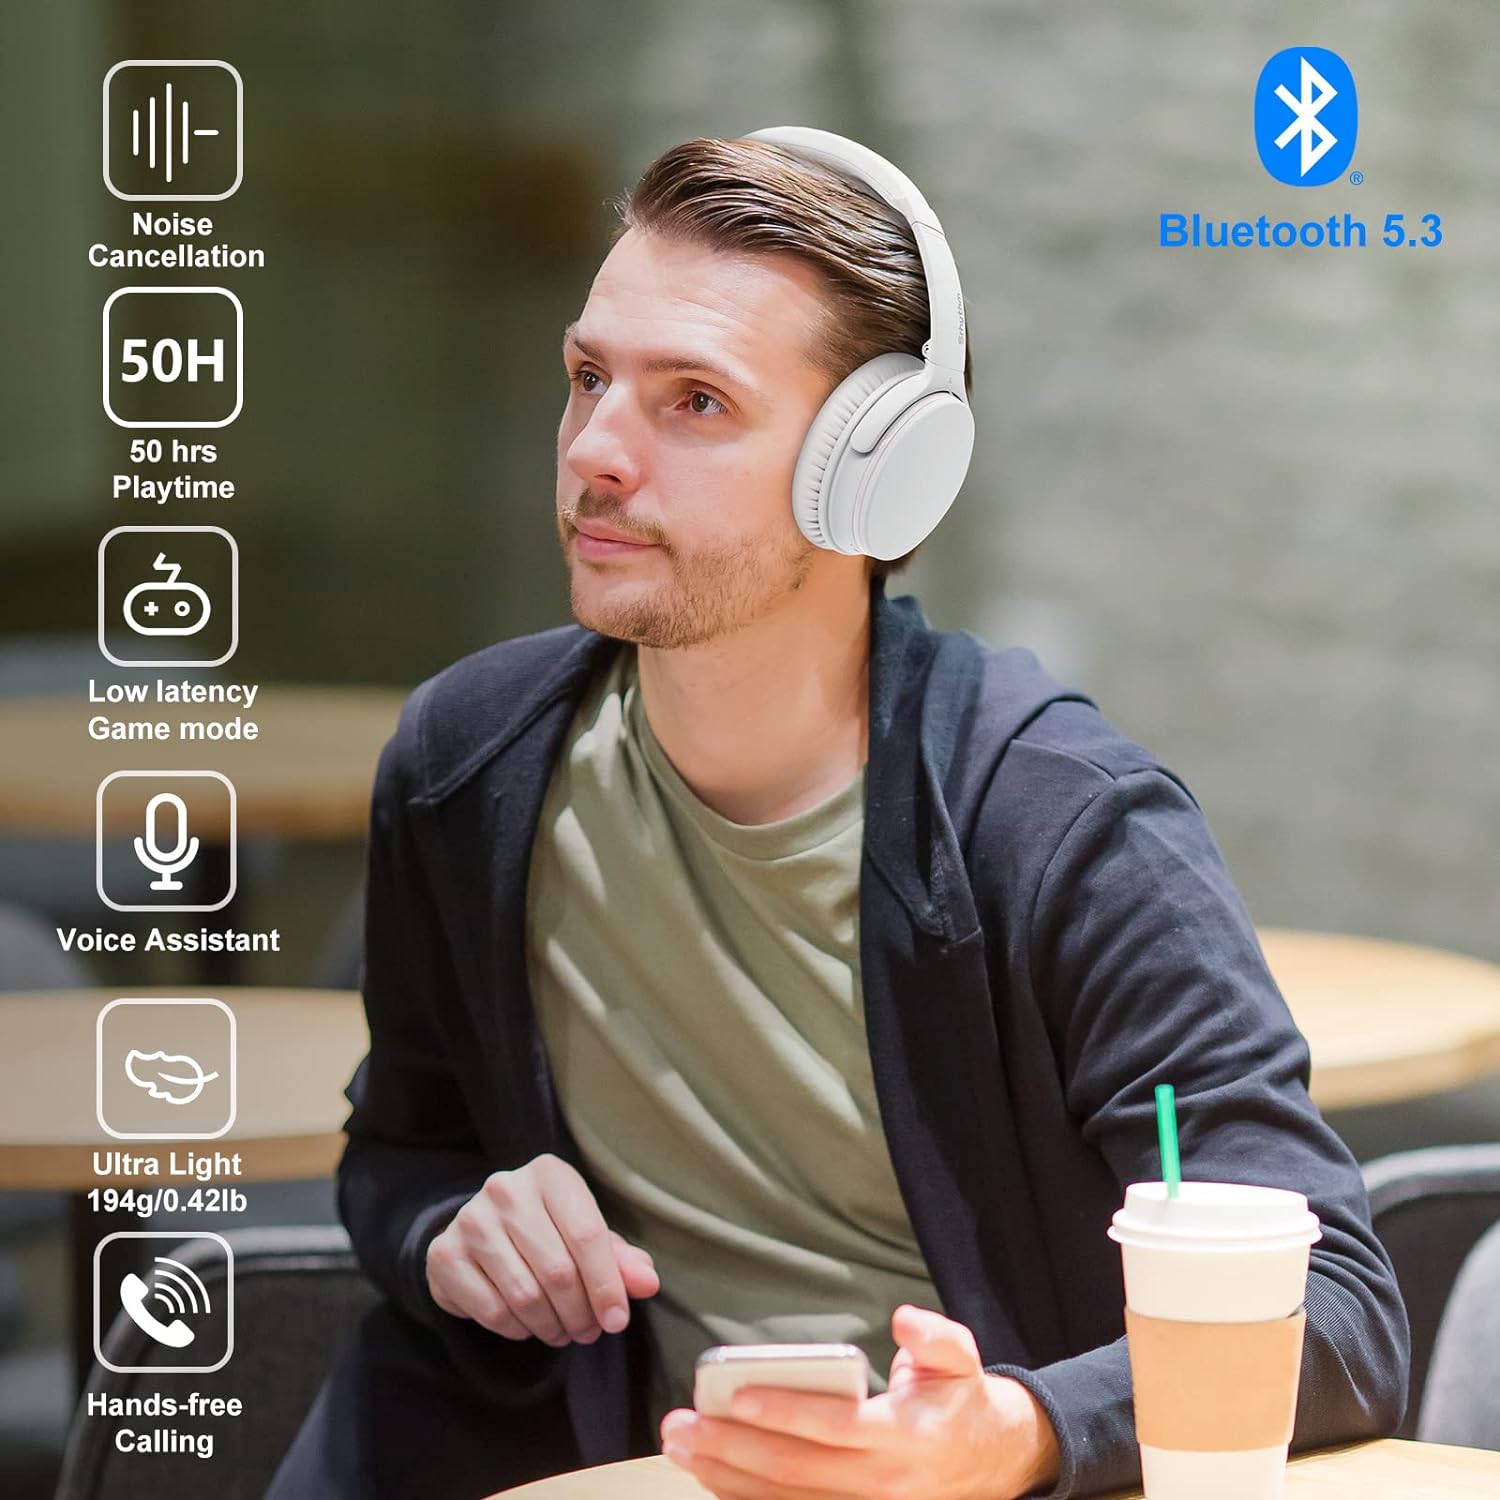 Srhythm NC25 Active Noise Cancelling Headphones Bluetooth 5.3, ANC Stereo Headset Over-Ear with Hi-Fi,Mic,50H Playtime,Voice Assistant,Low Latency Game Mode